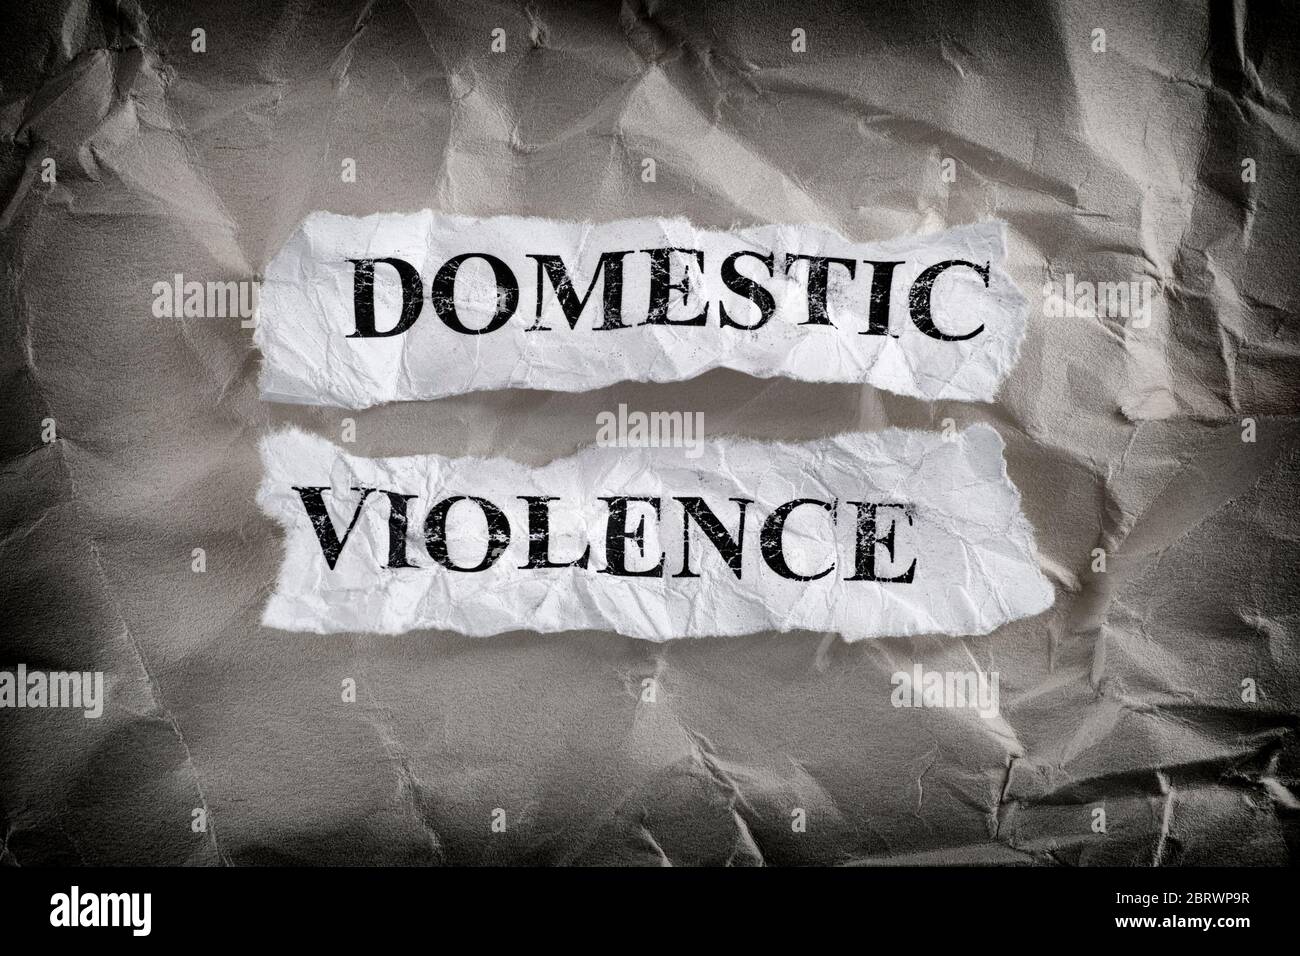 Domestic violence. Torn pieces of paper with the words Domestic Violence written on them on crumpled paper background. Concept Image. Closeup. Stock Photo